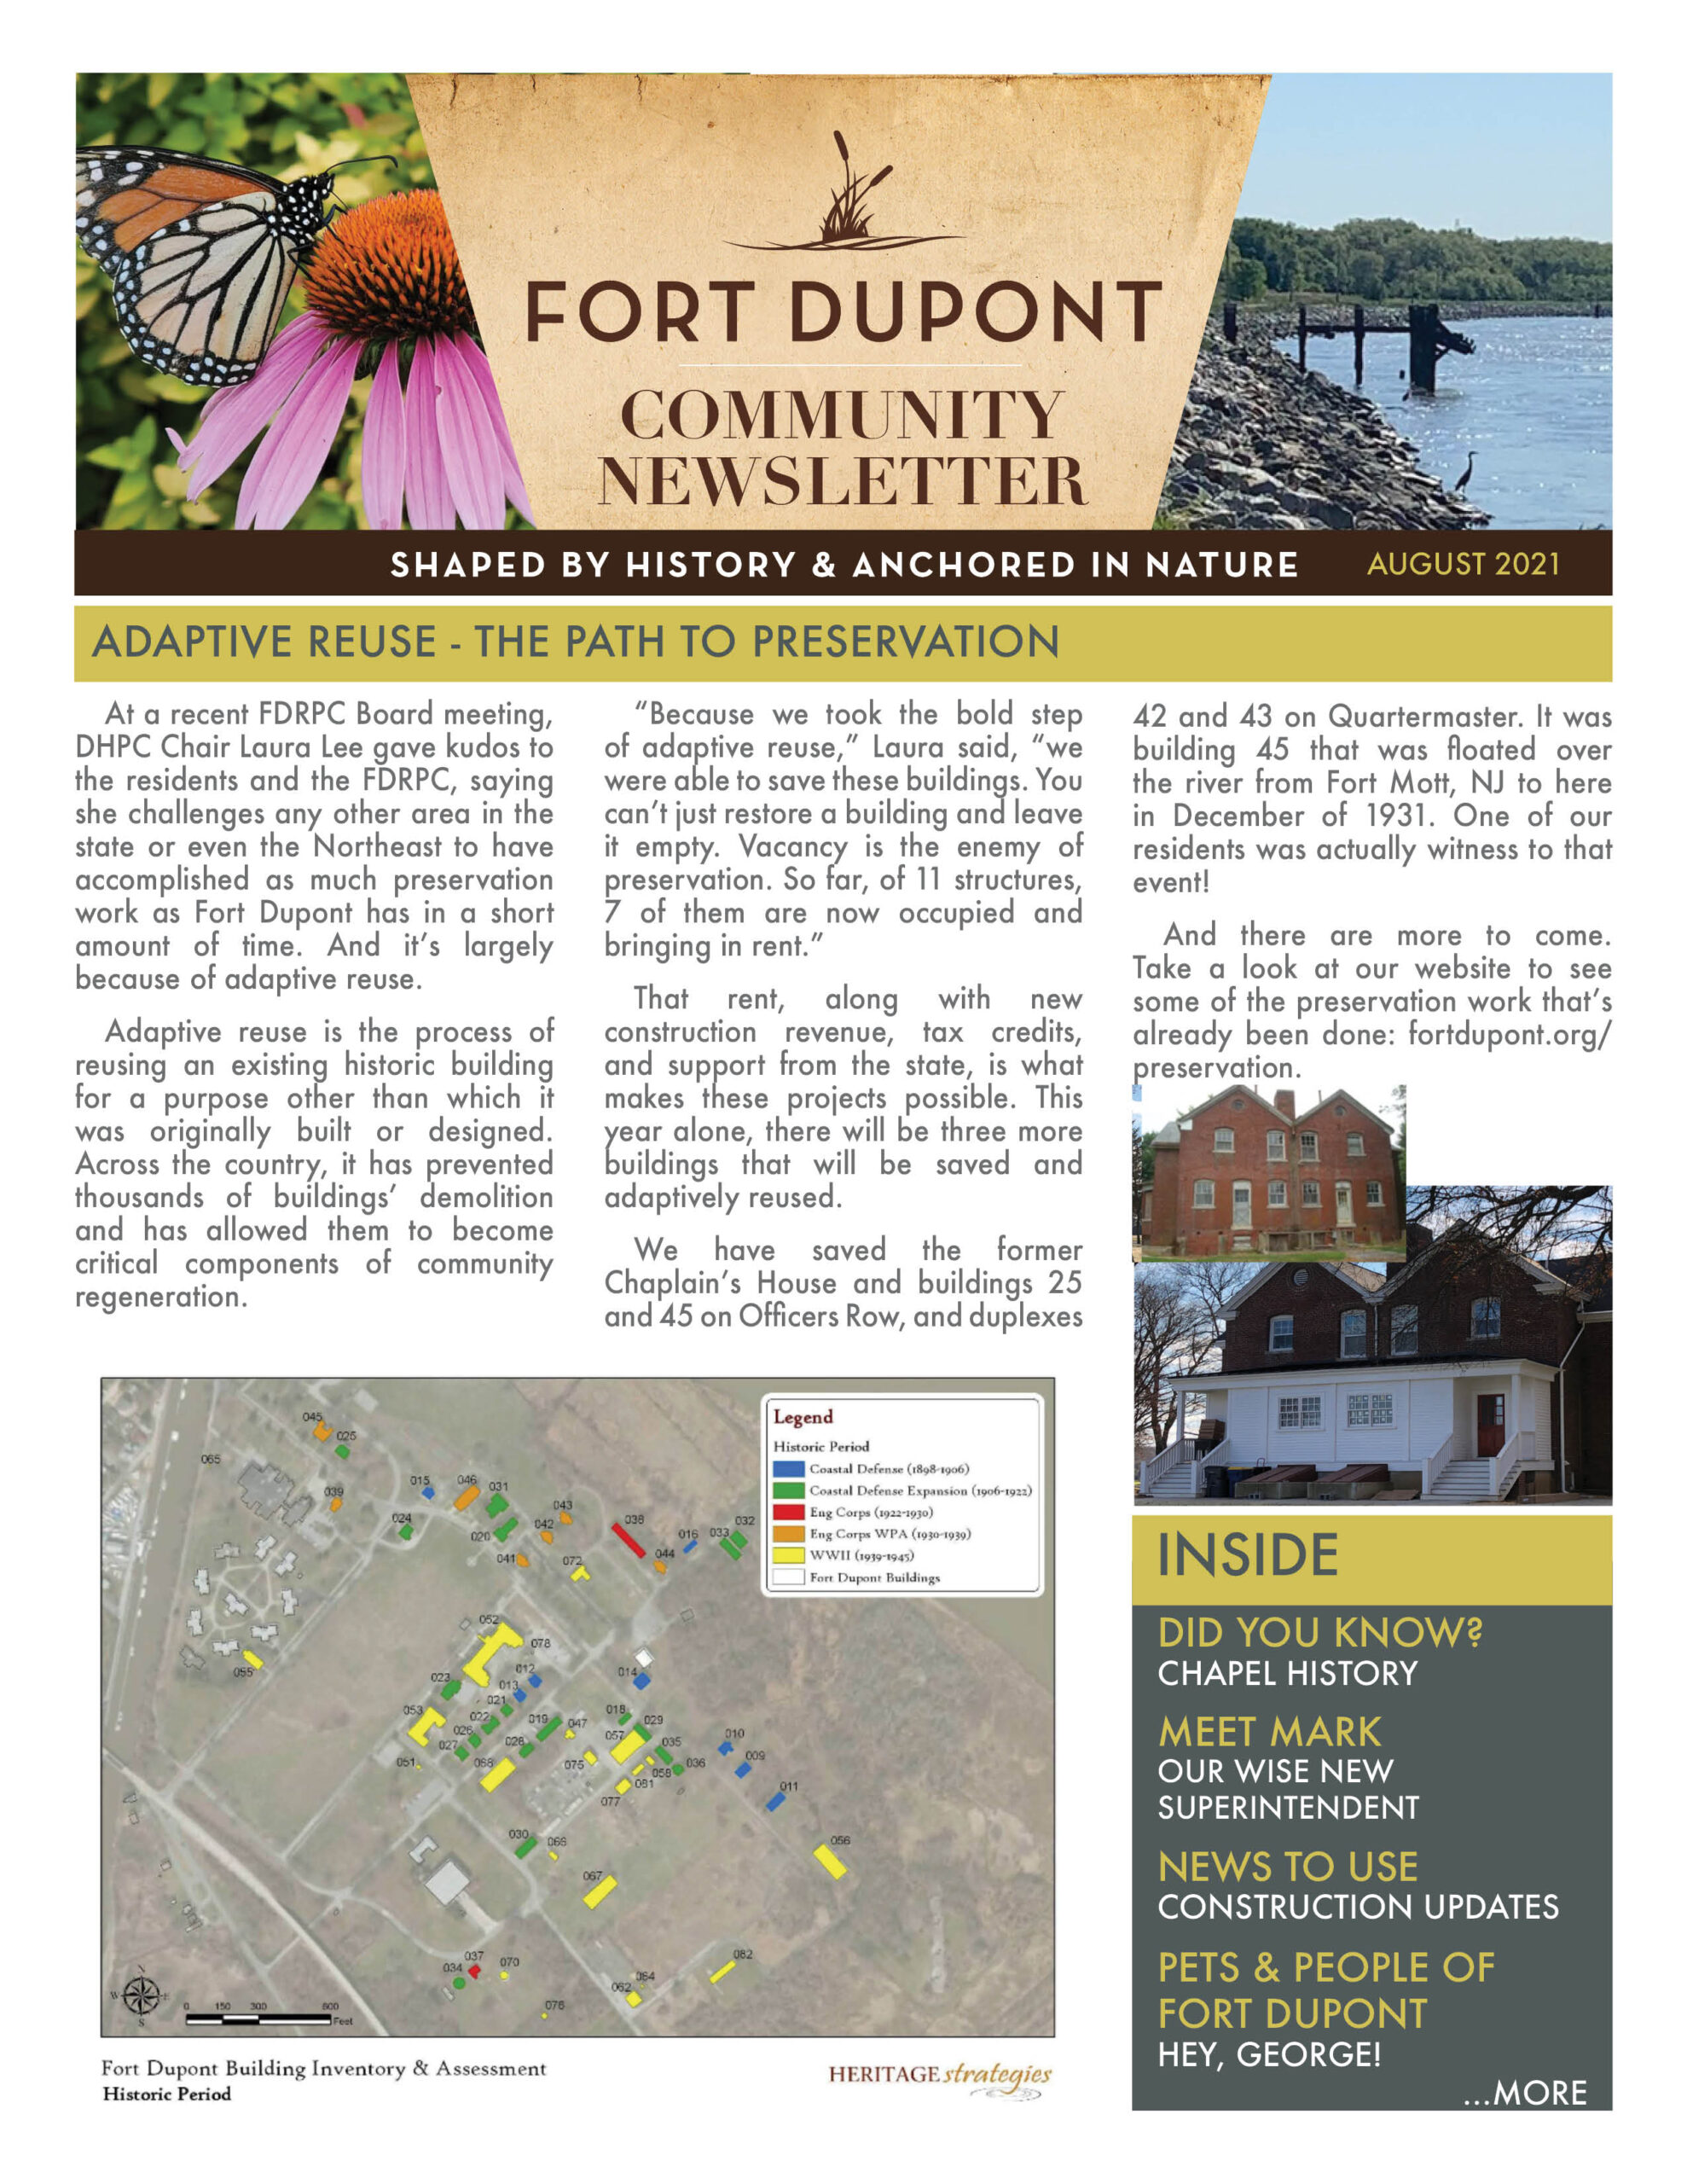 Fort DuPont Newsletter May 2021